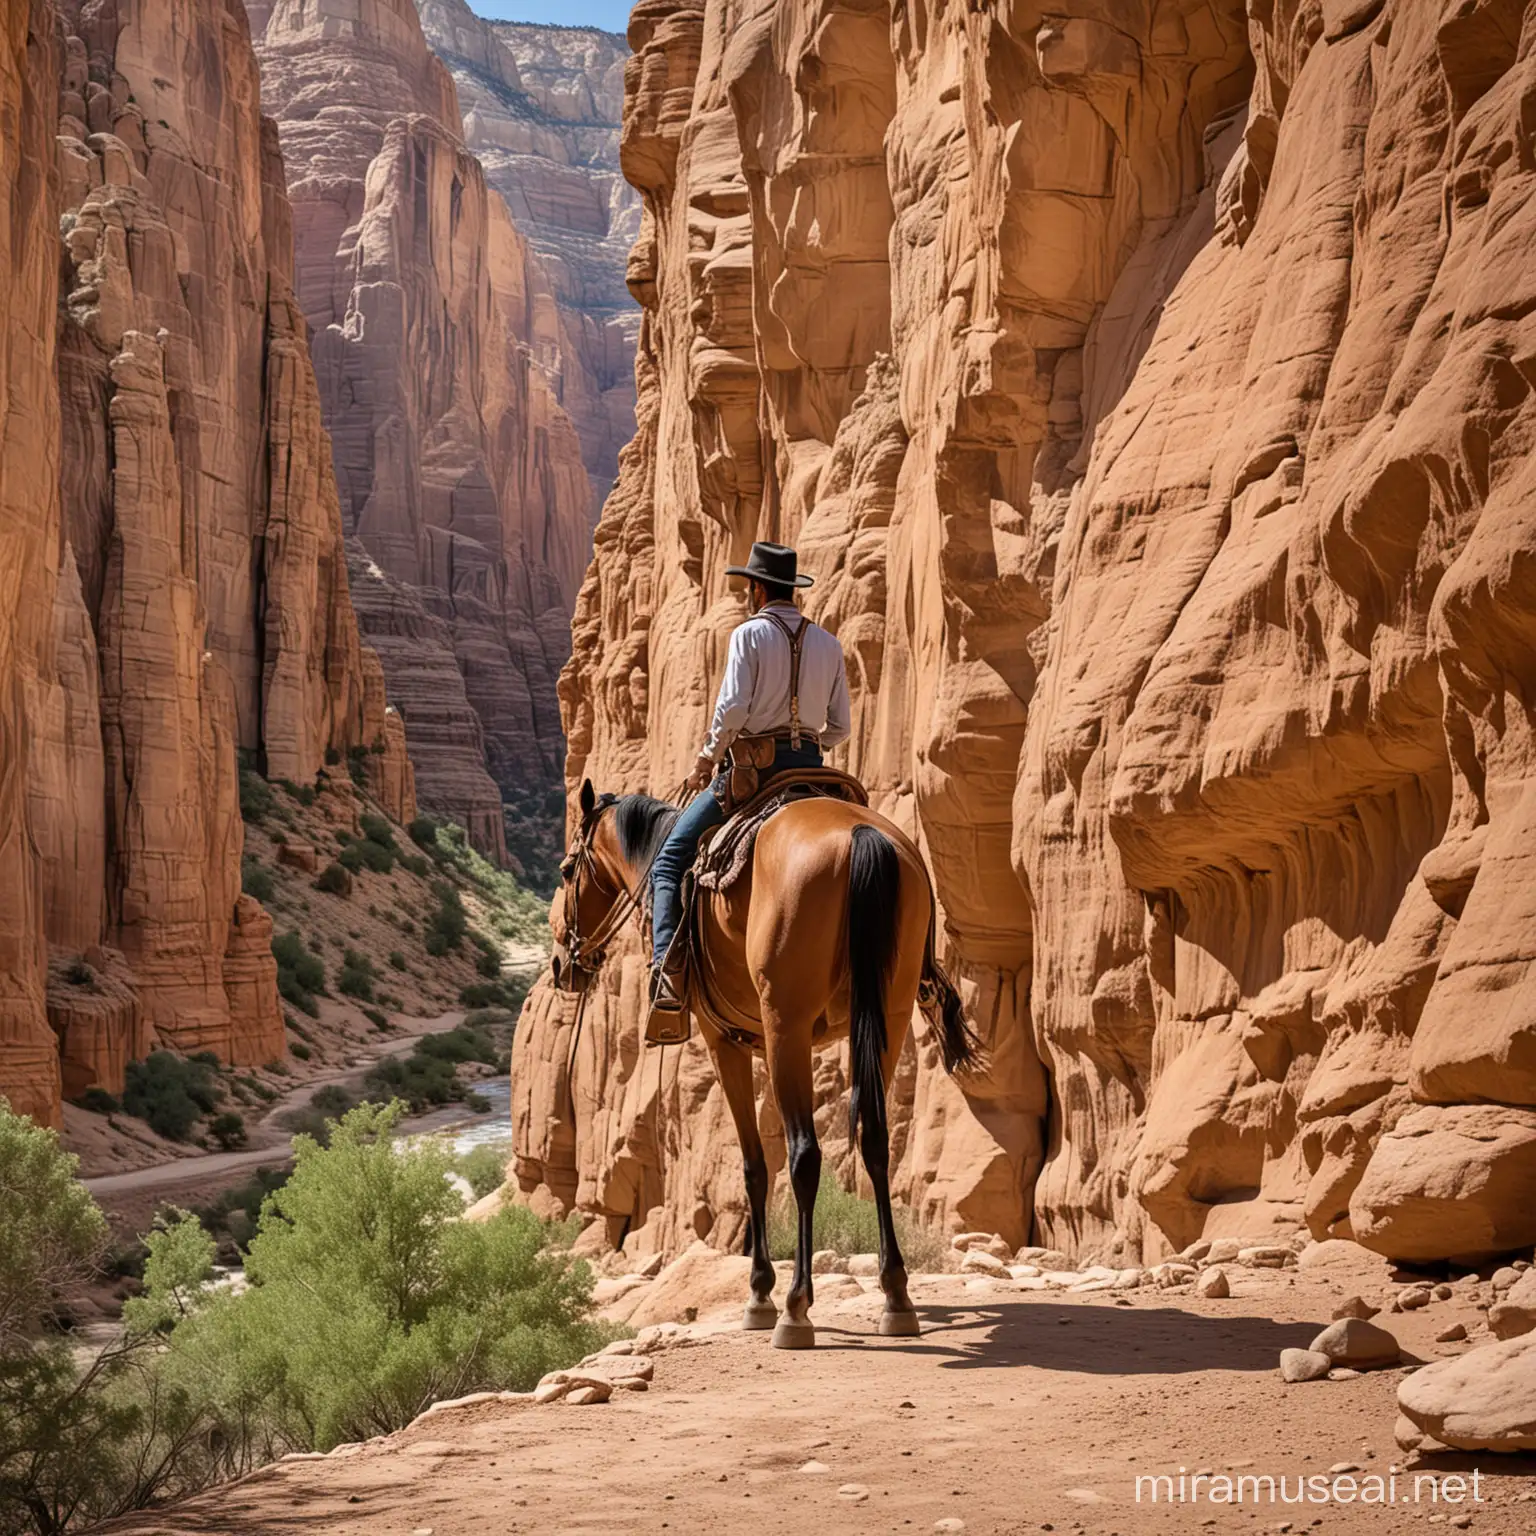 A tall boudler in the old west in a secluded canyon